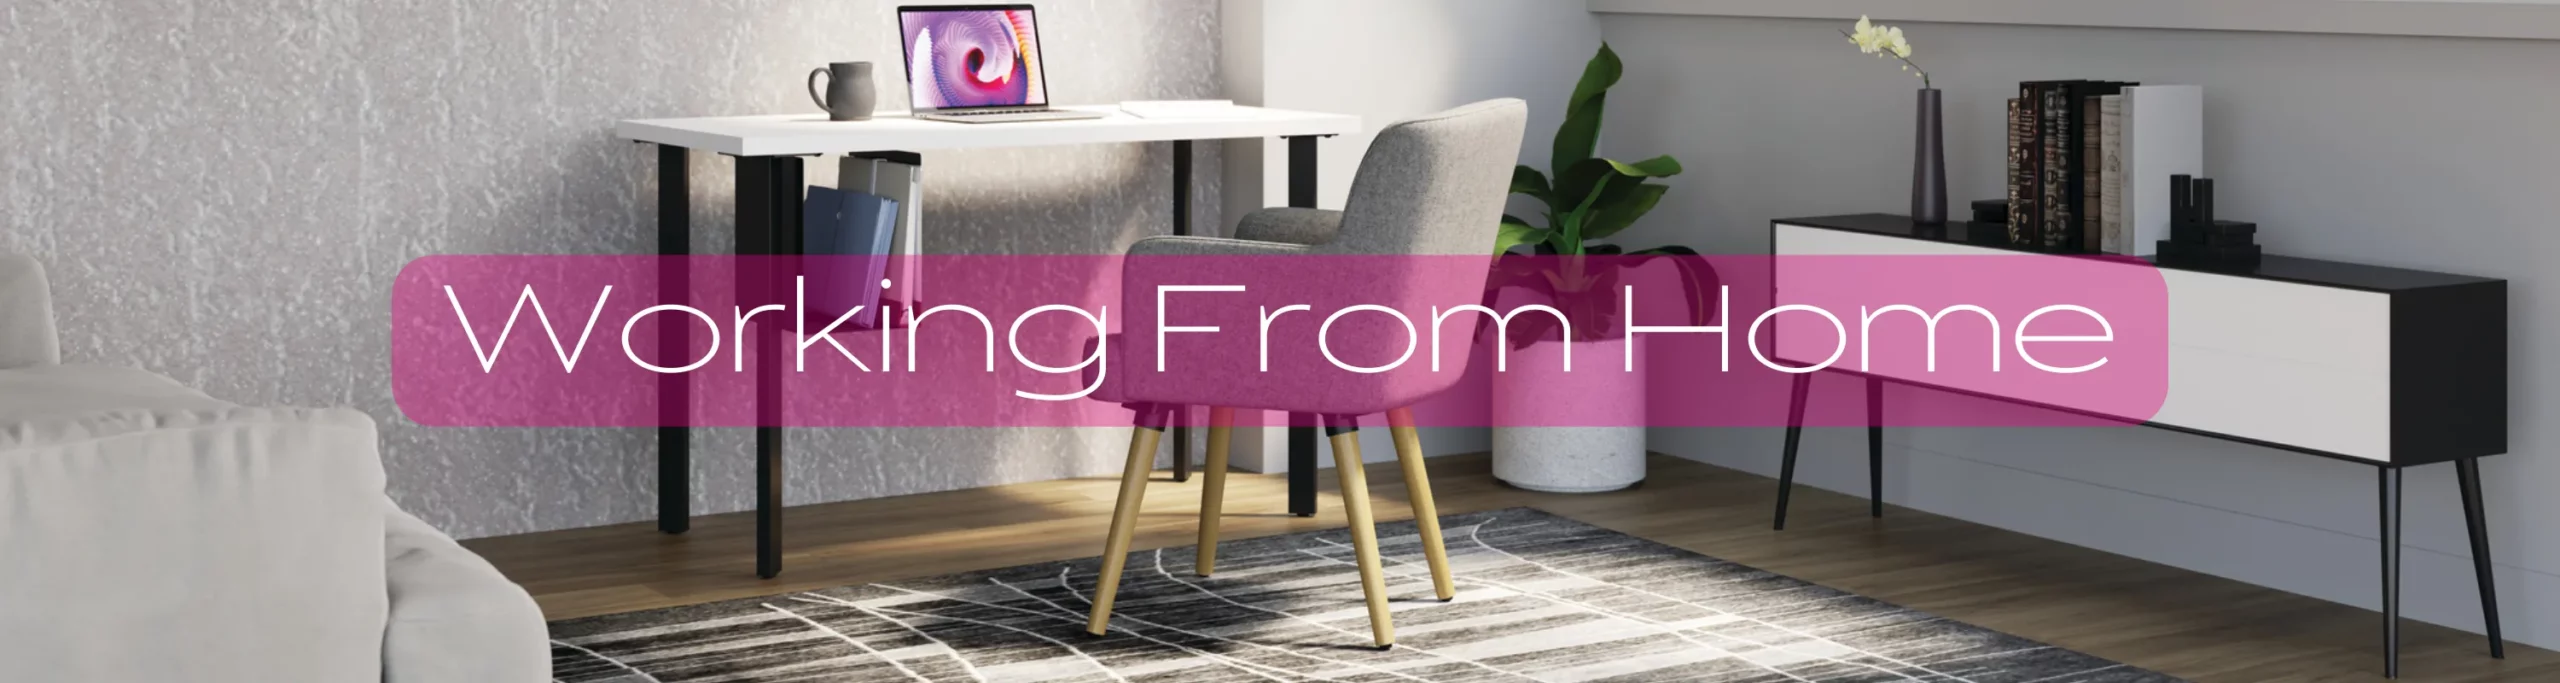 Working from Home Banner